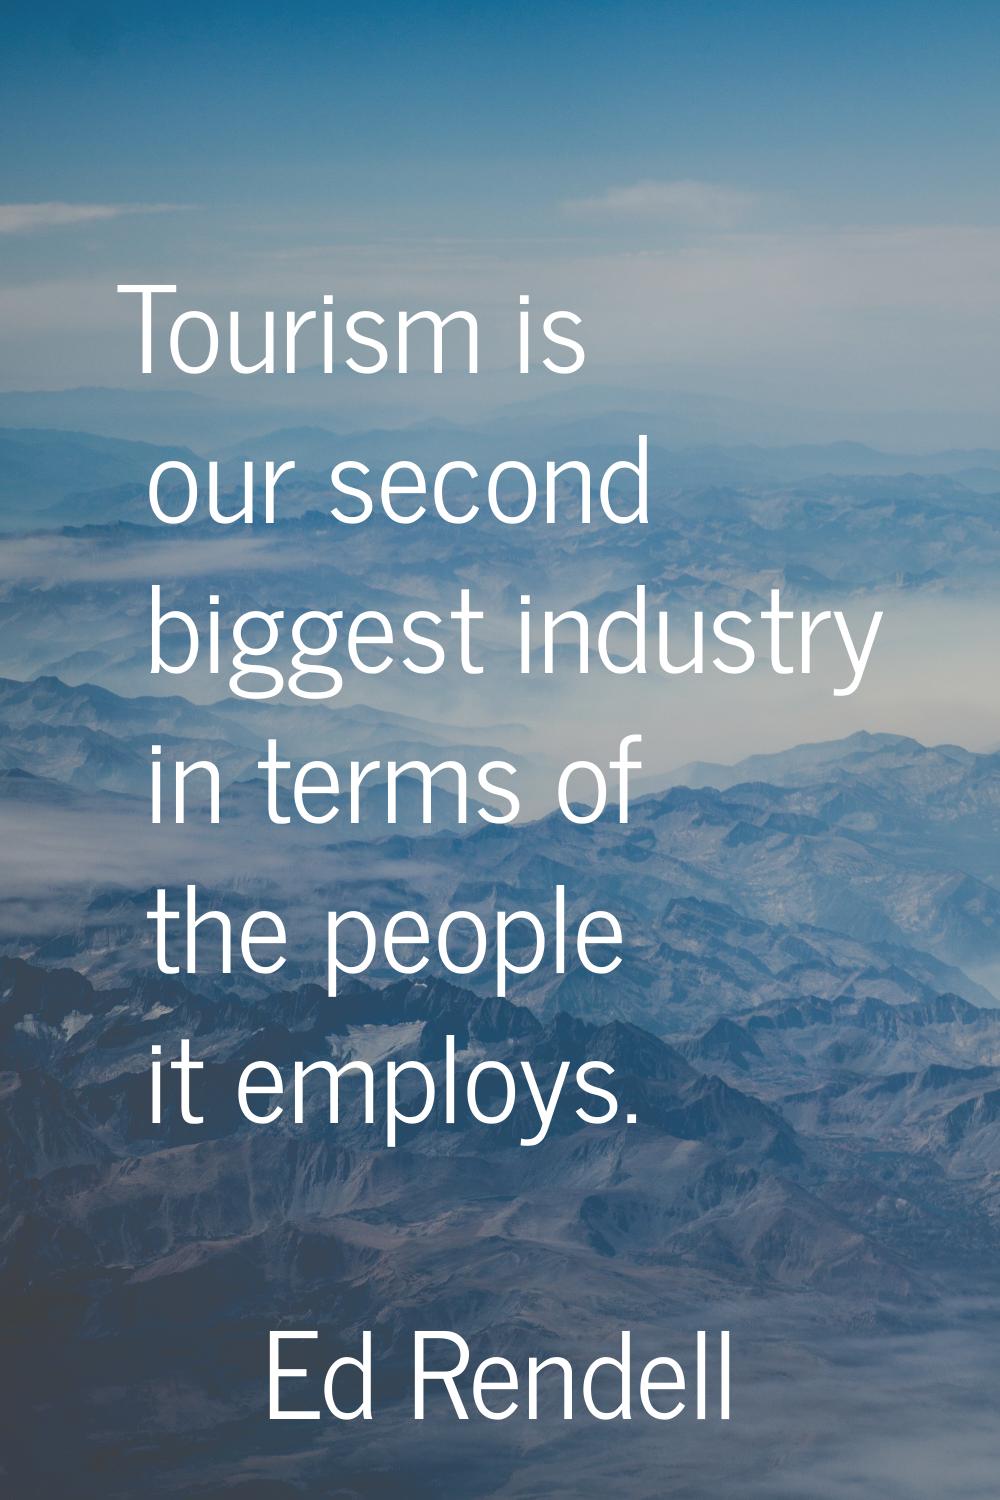 Tourism is our second biggest industry in terms of the people it employs.